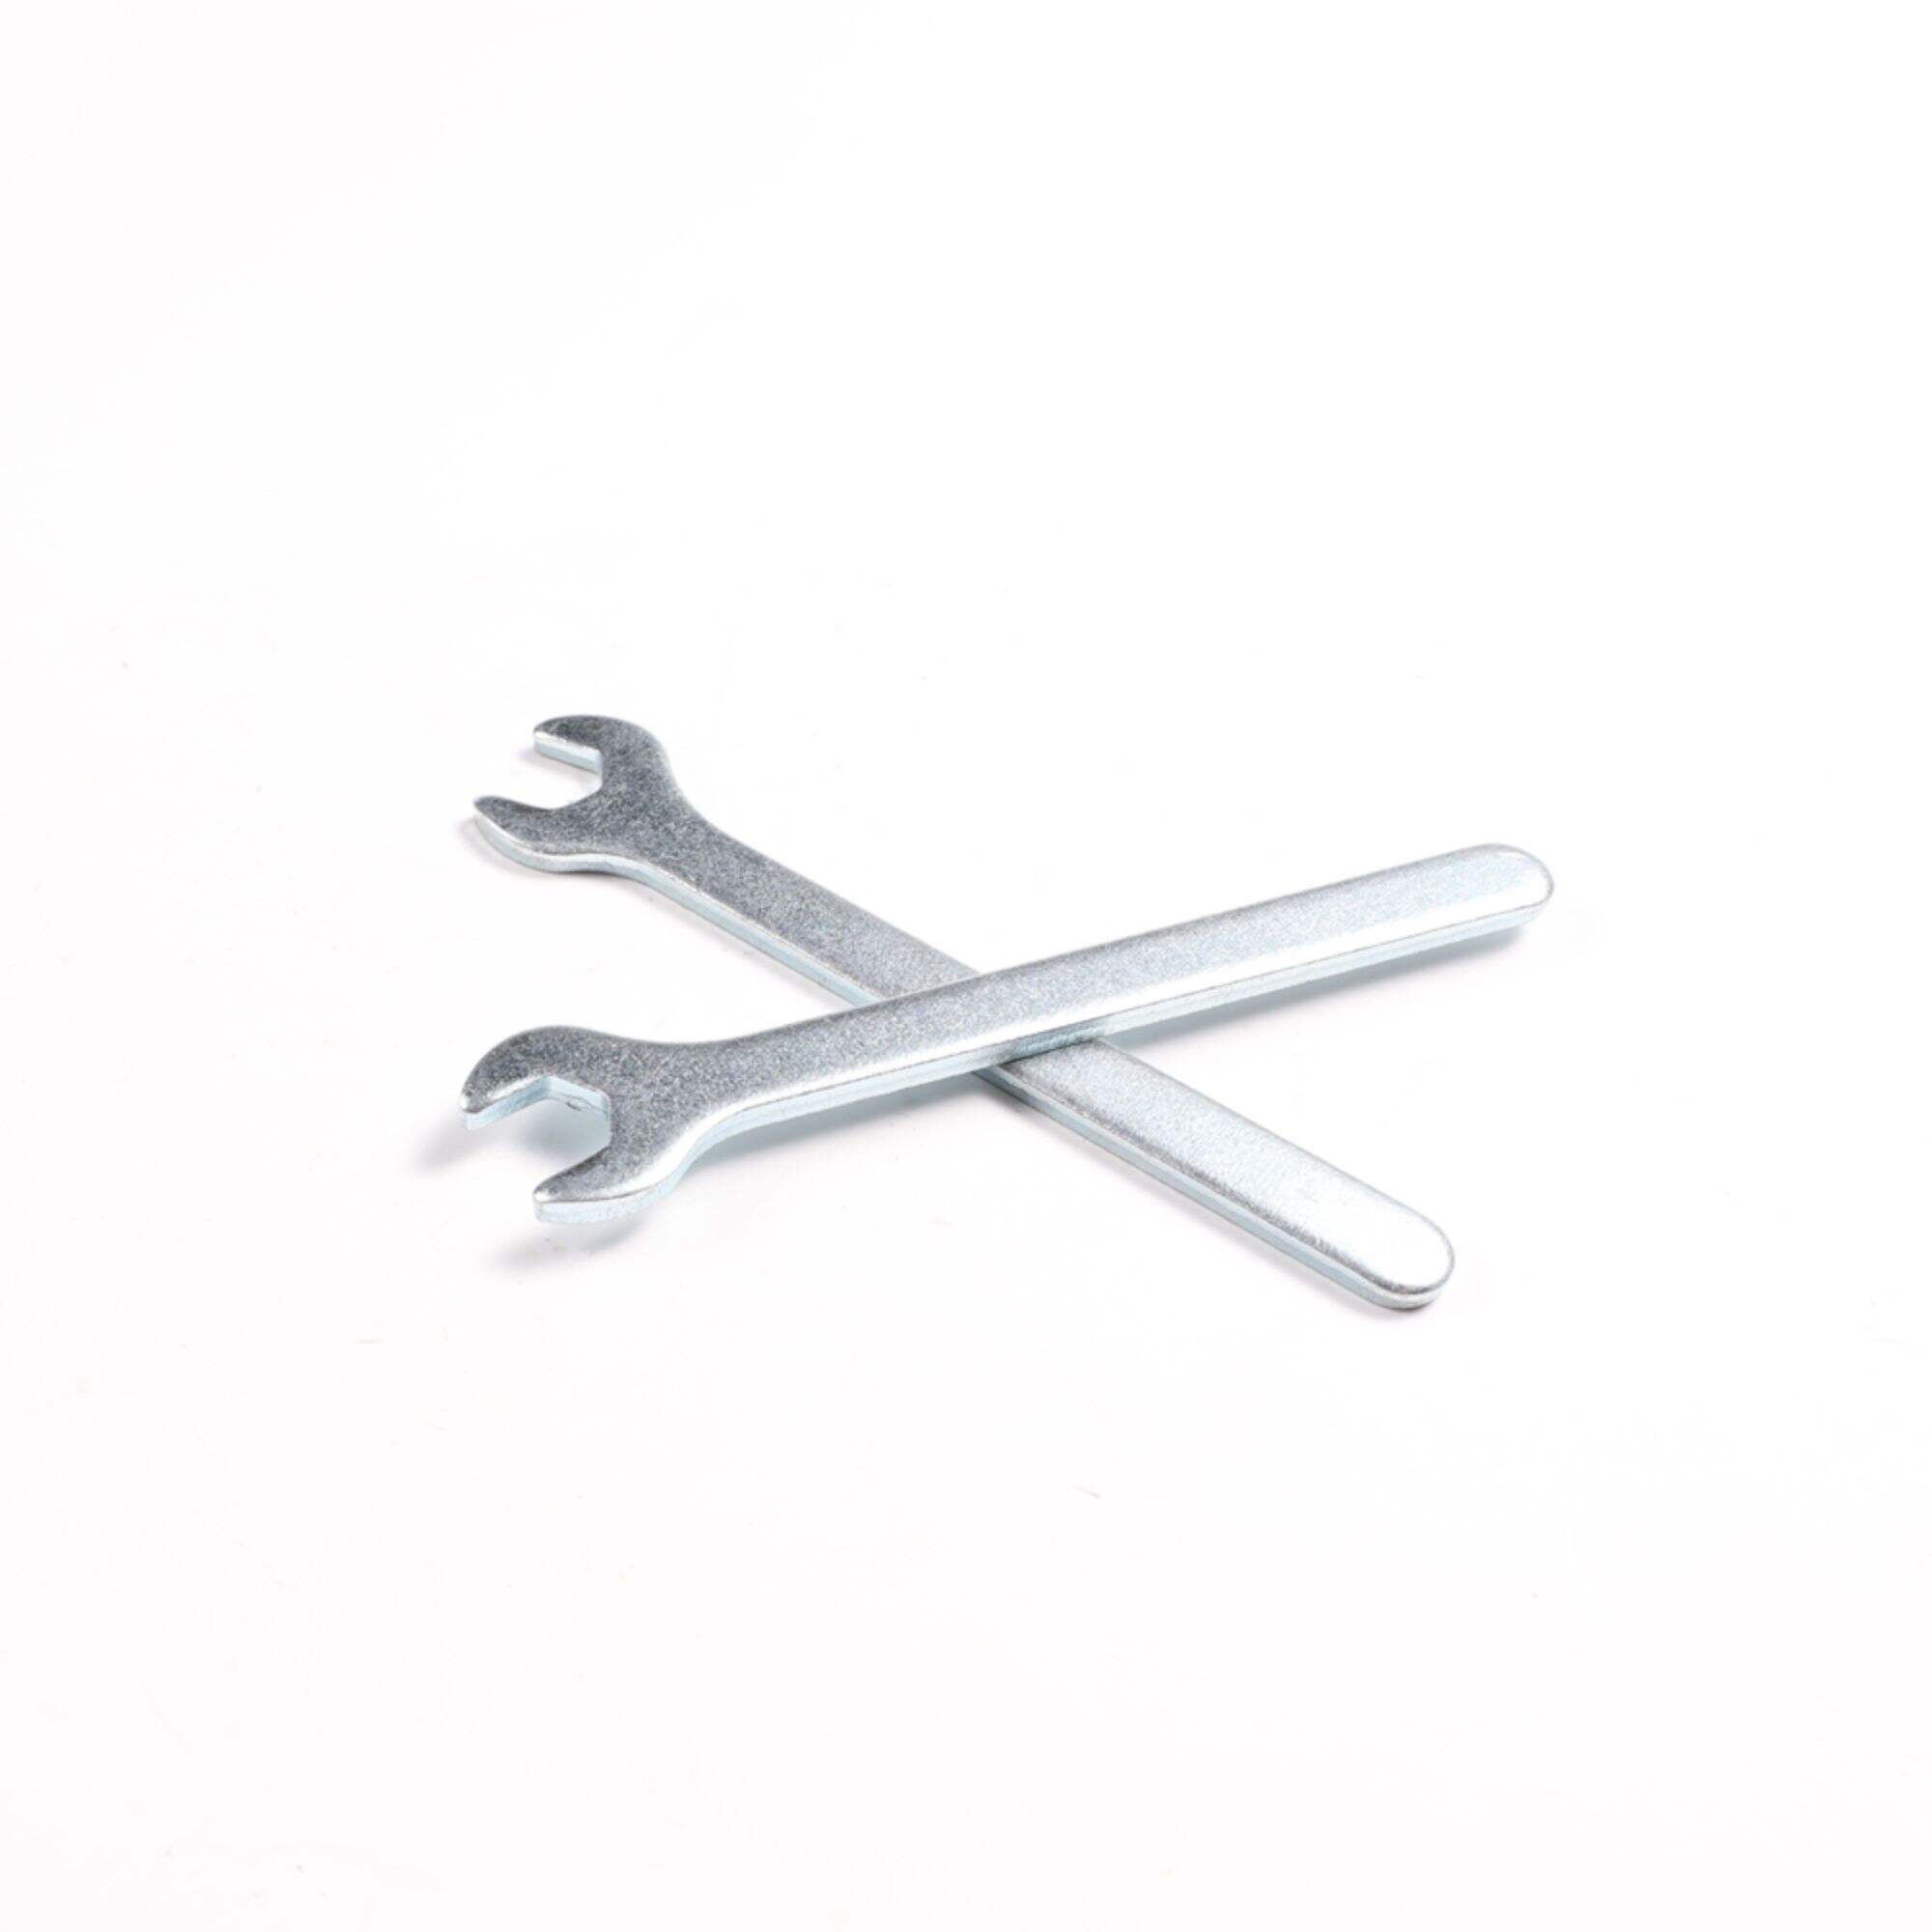 Carbon Steel With Zinc Plated L Shaped Hex Hexagon Key Allen Wrench Allen Key